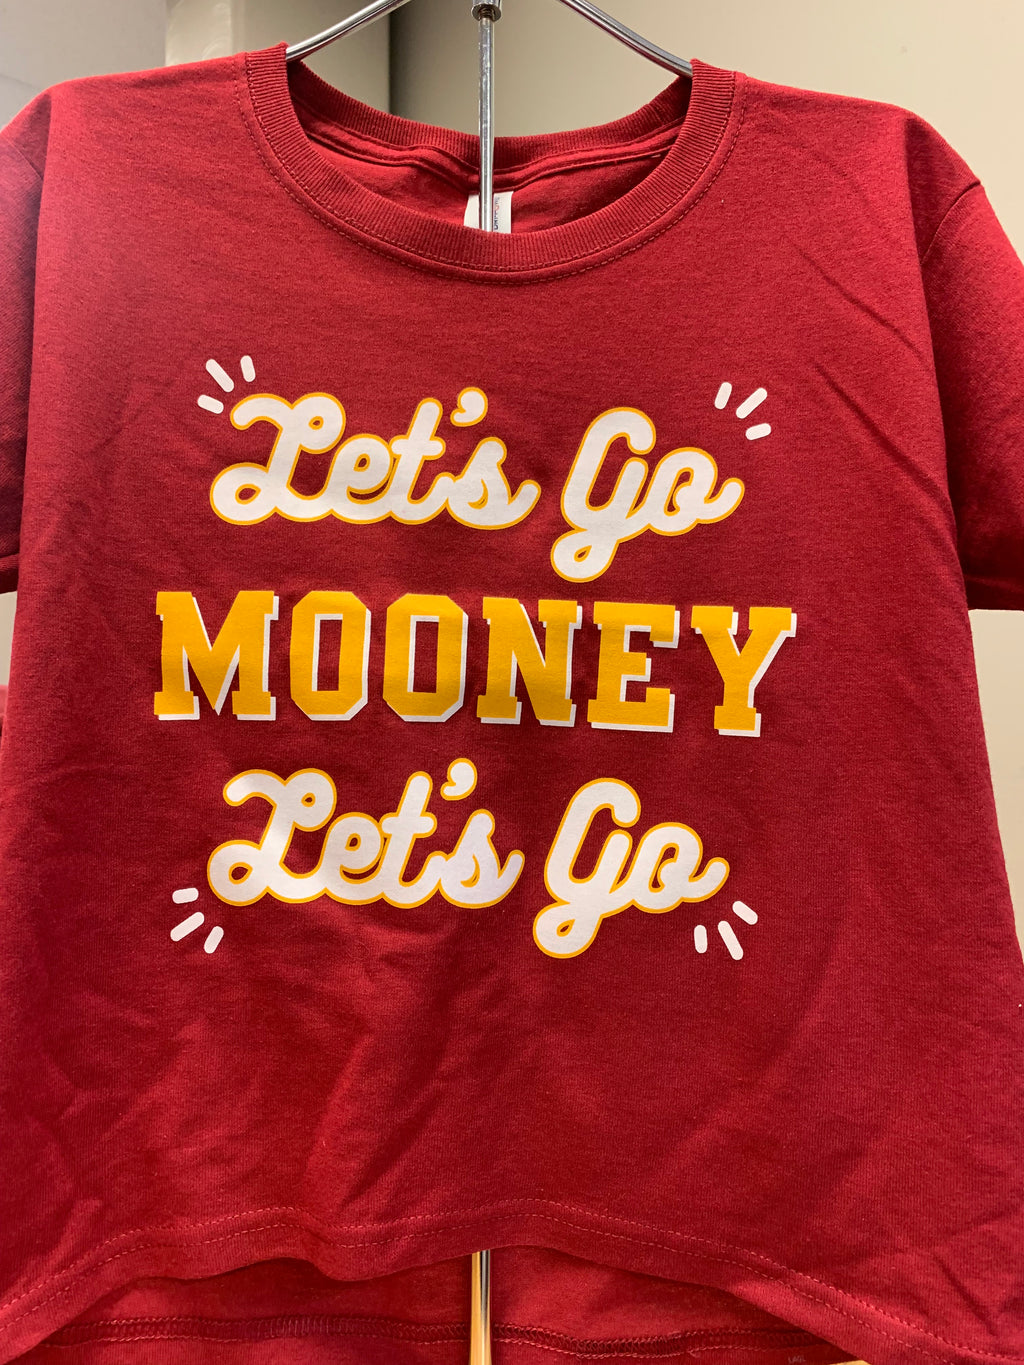 YOUTH LET'S GO MOONEY T-SHIRT